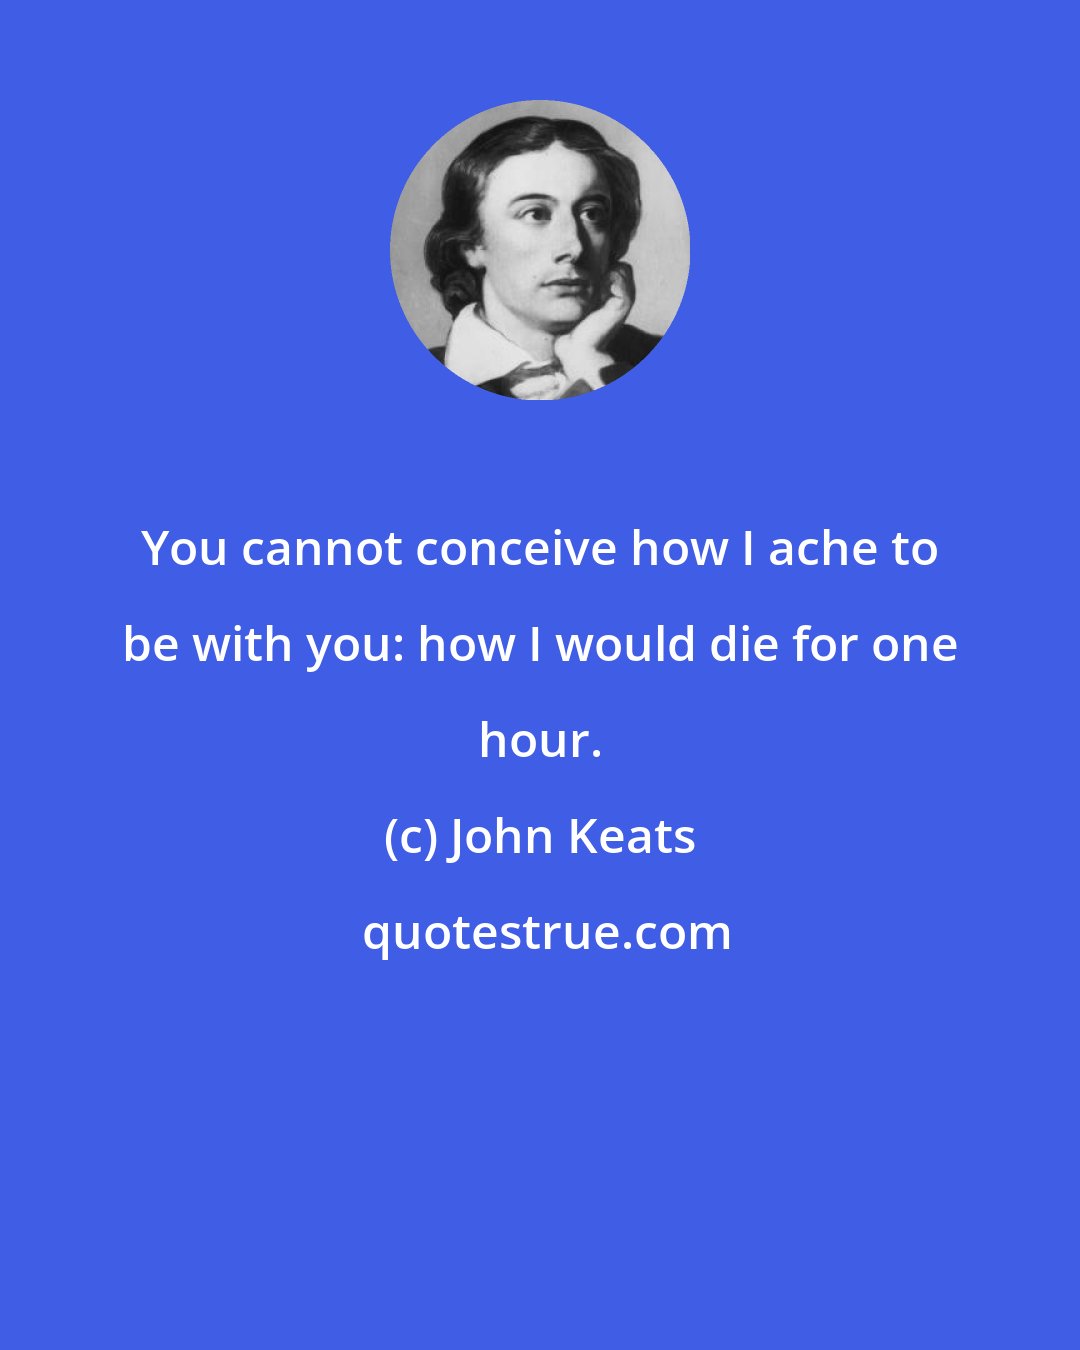 John Keats: You cannot conceive how I ache to be with you: how I would die for one hour.